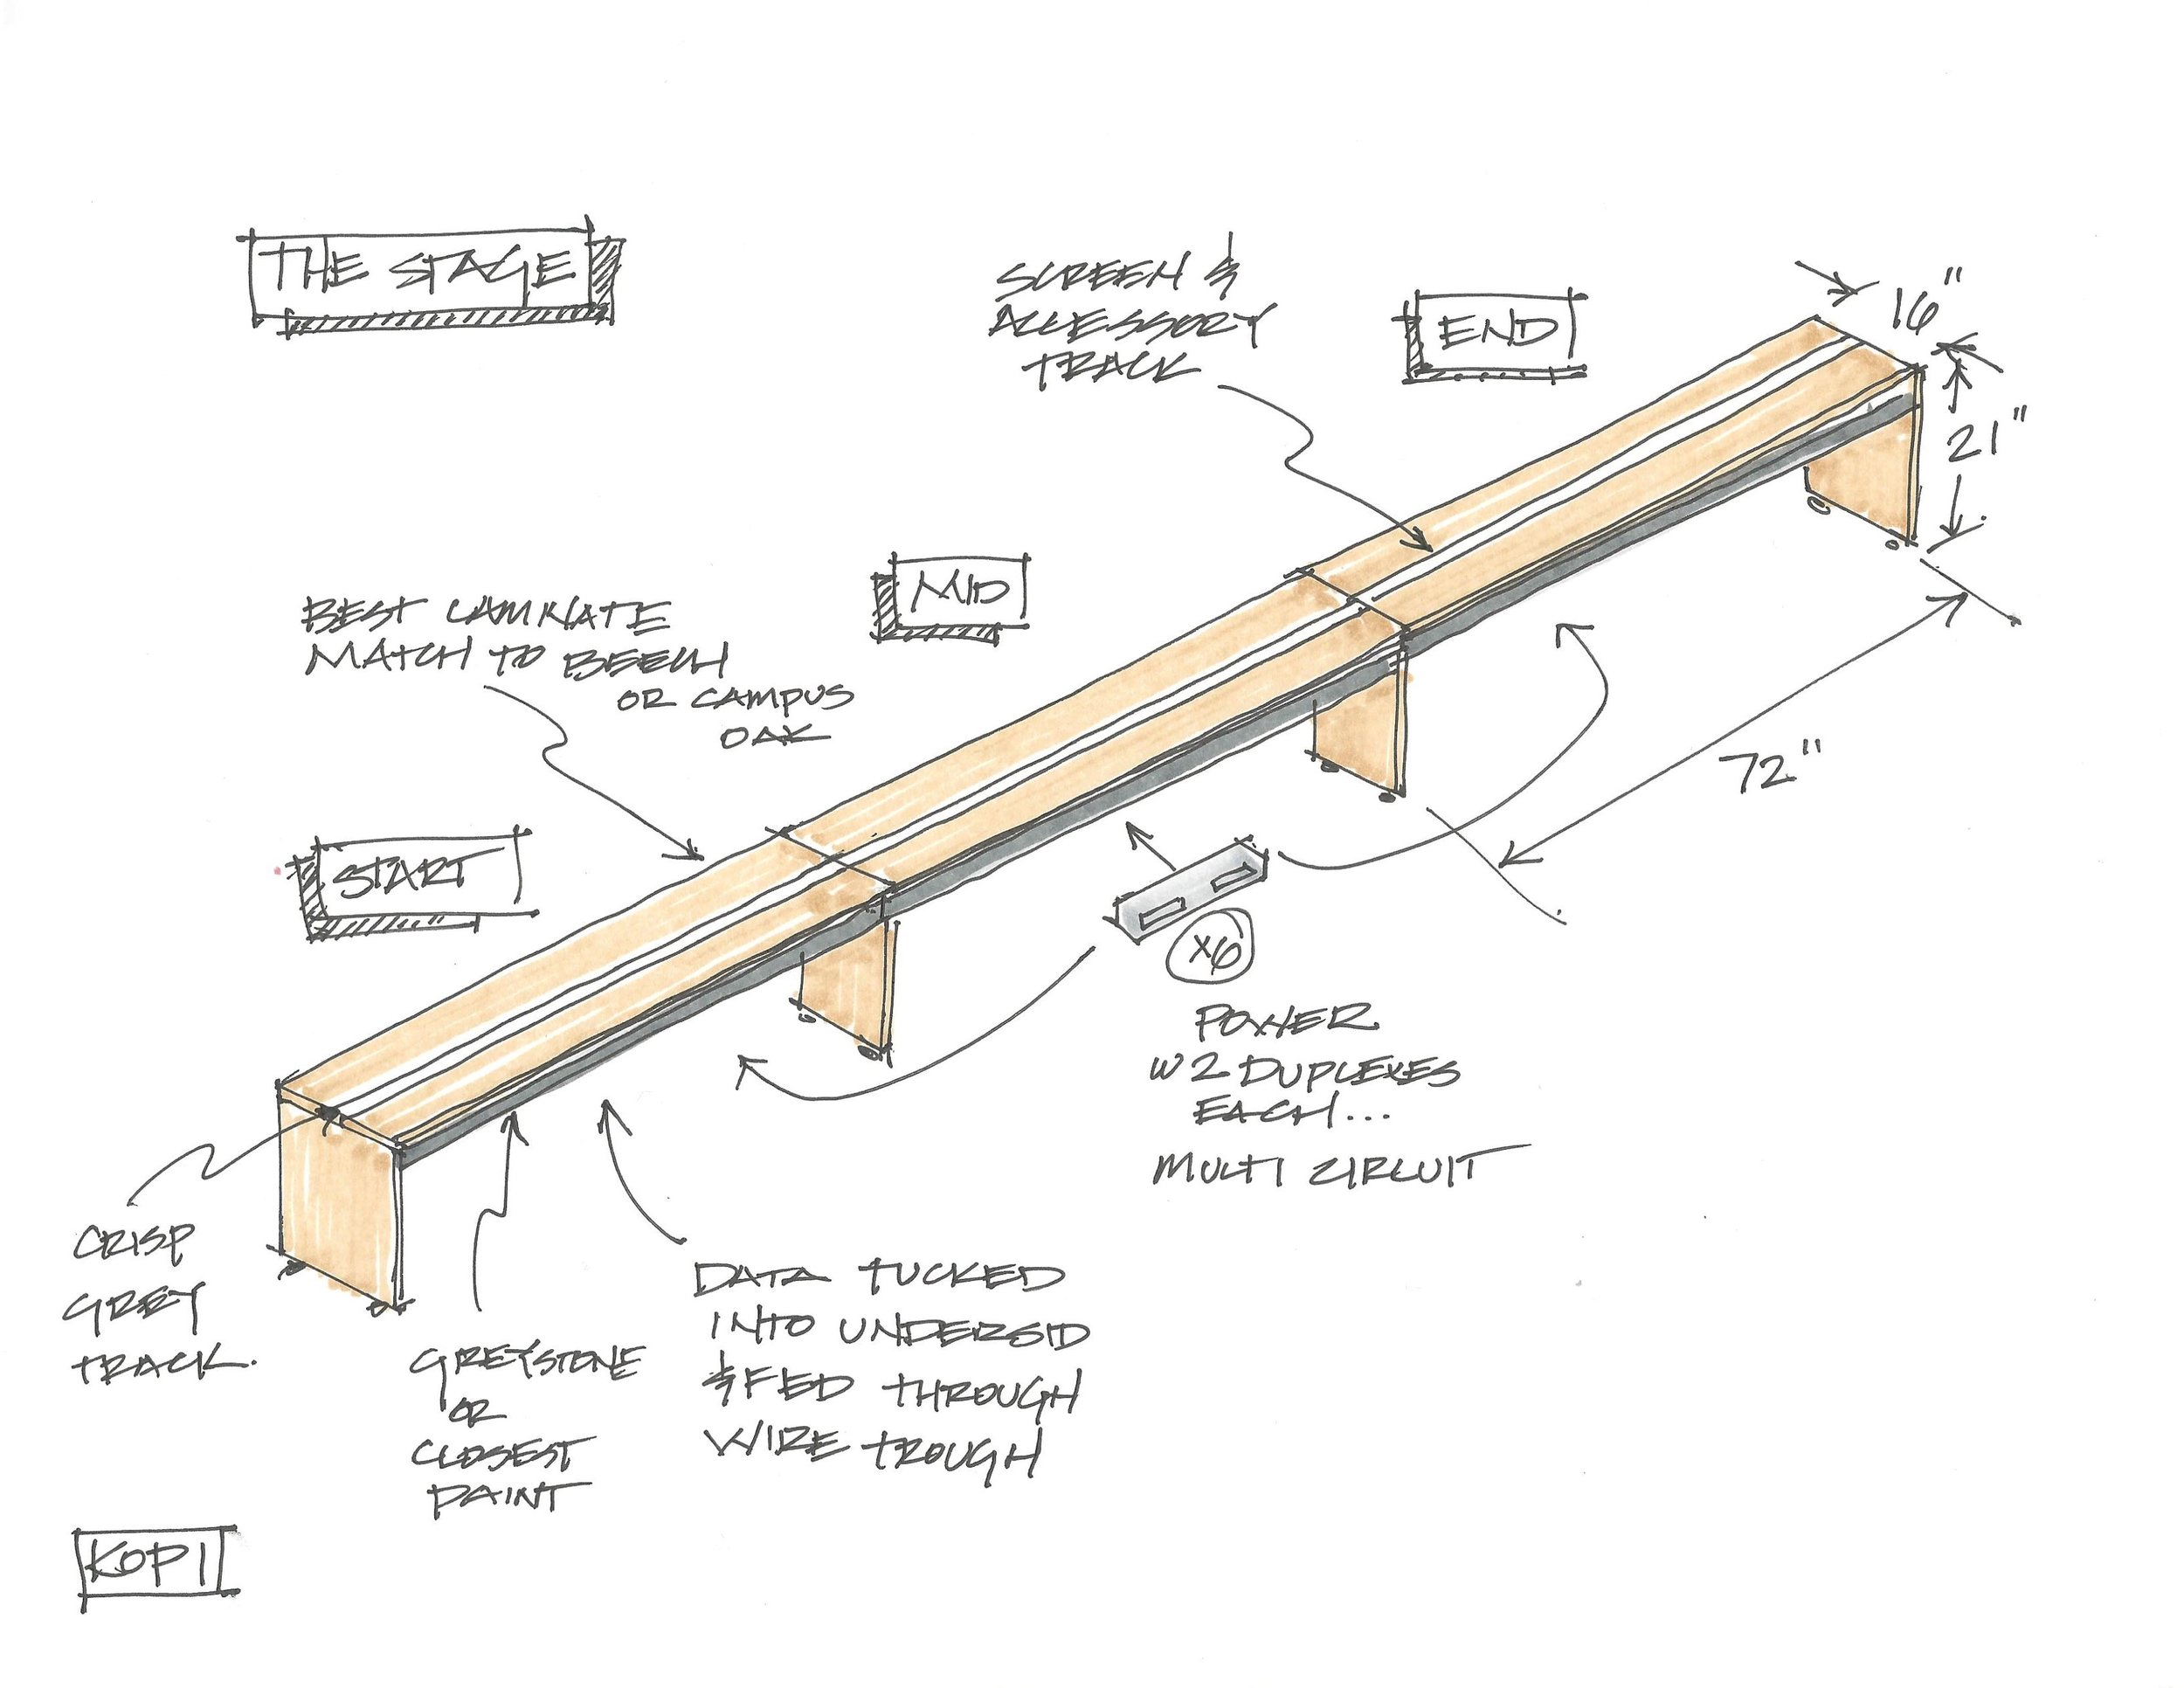  A sketch for a potential client showing the base platform, or stage, that supports the system. 